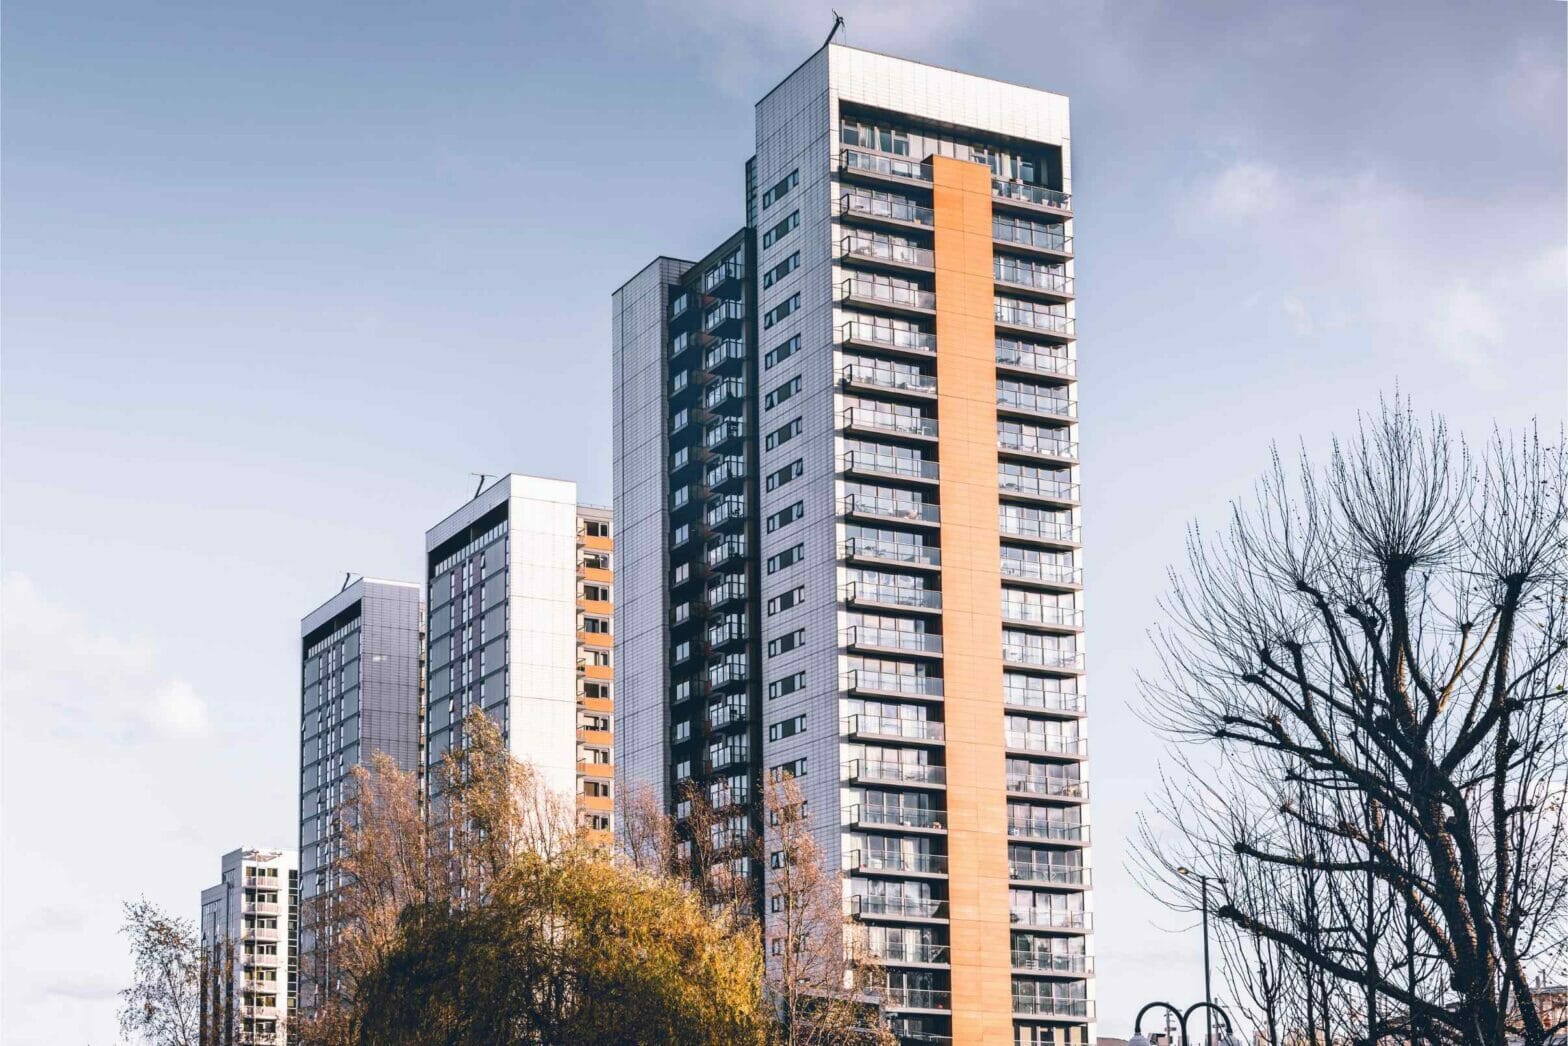 Hyfire protects 4 London towers after extremely quick installation